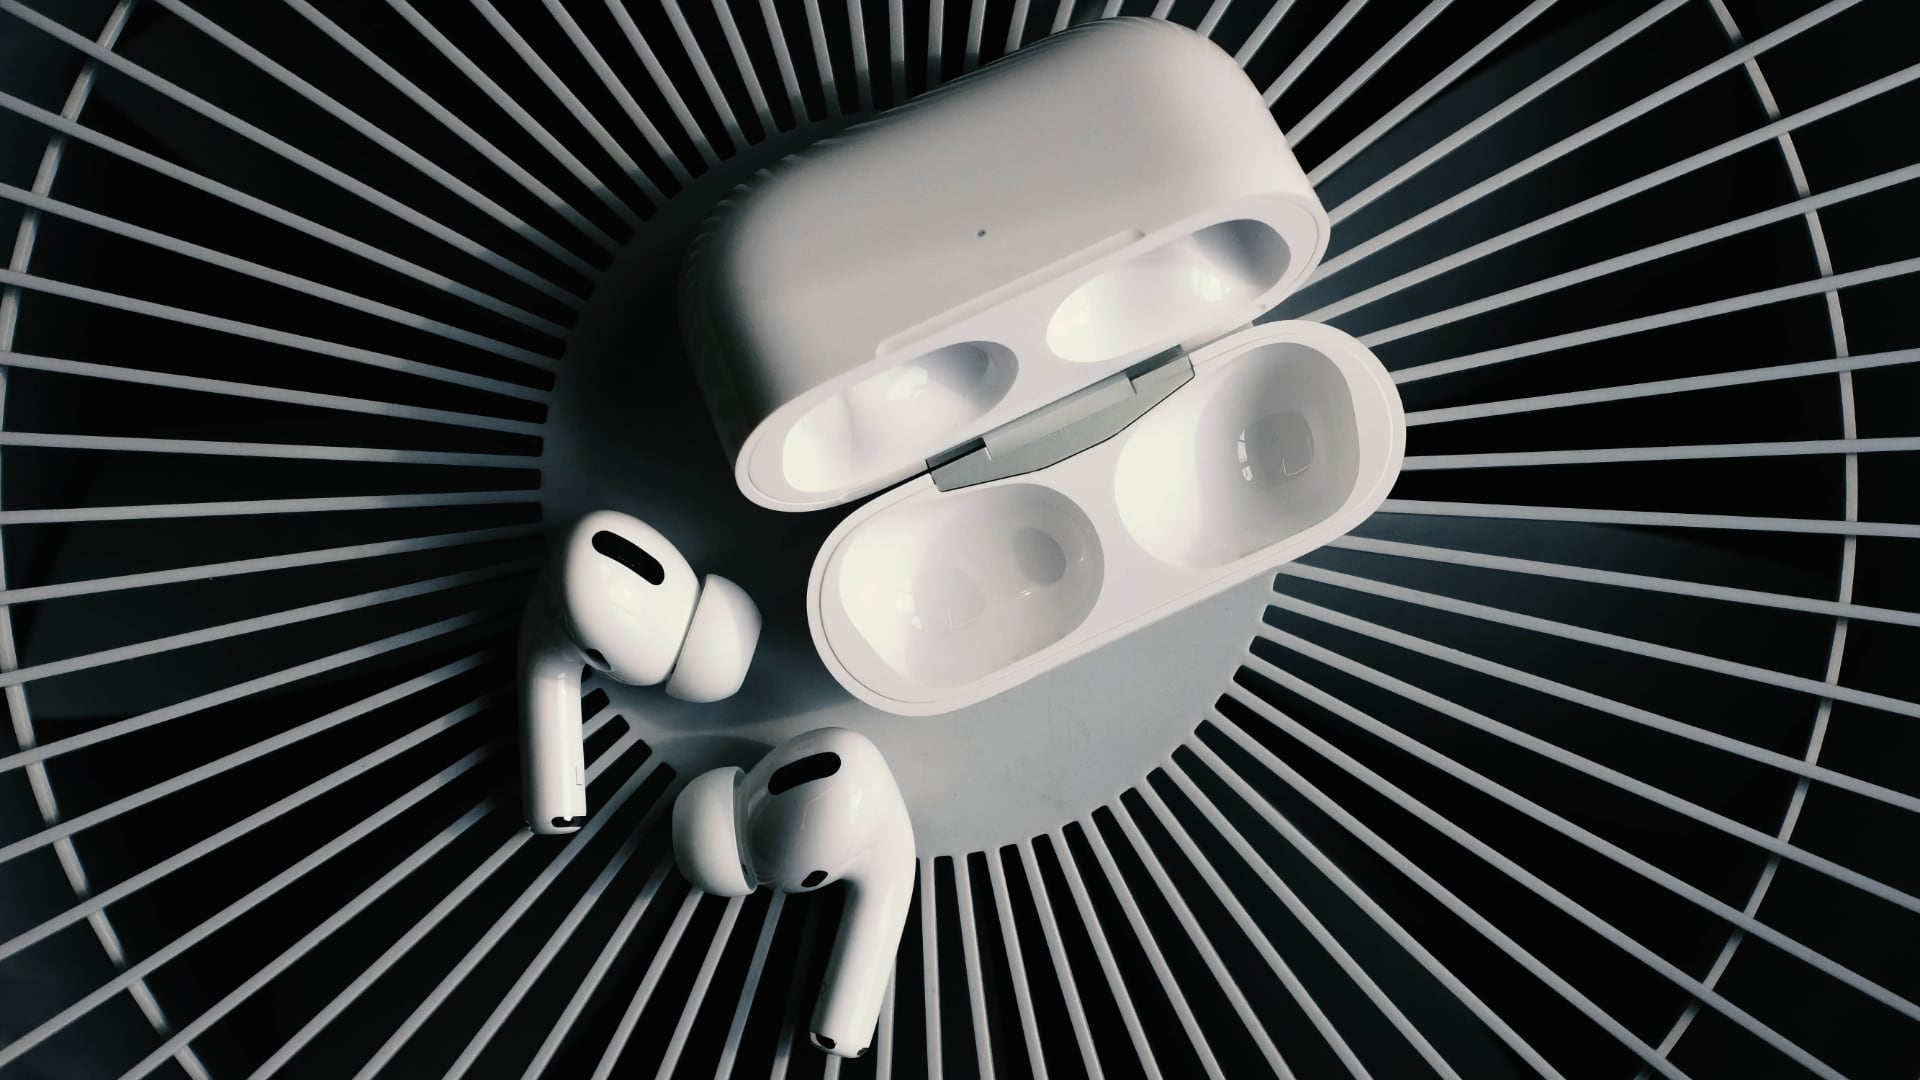 In the works: New AirPods Max and Pro, hearing test, health sensors and more